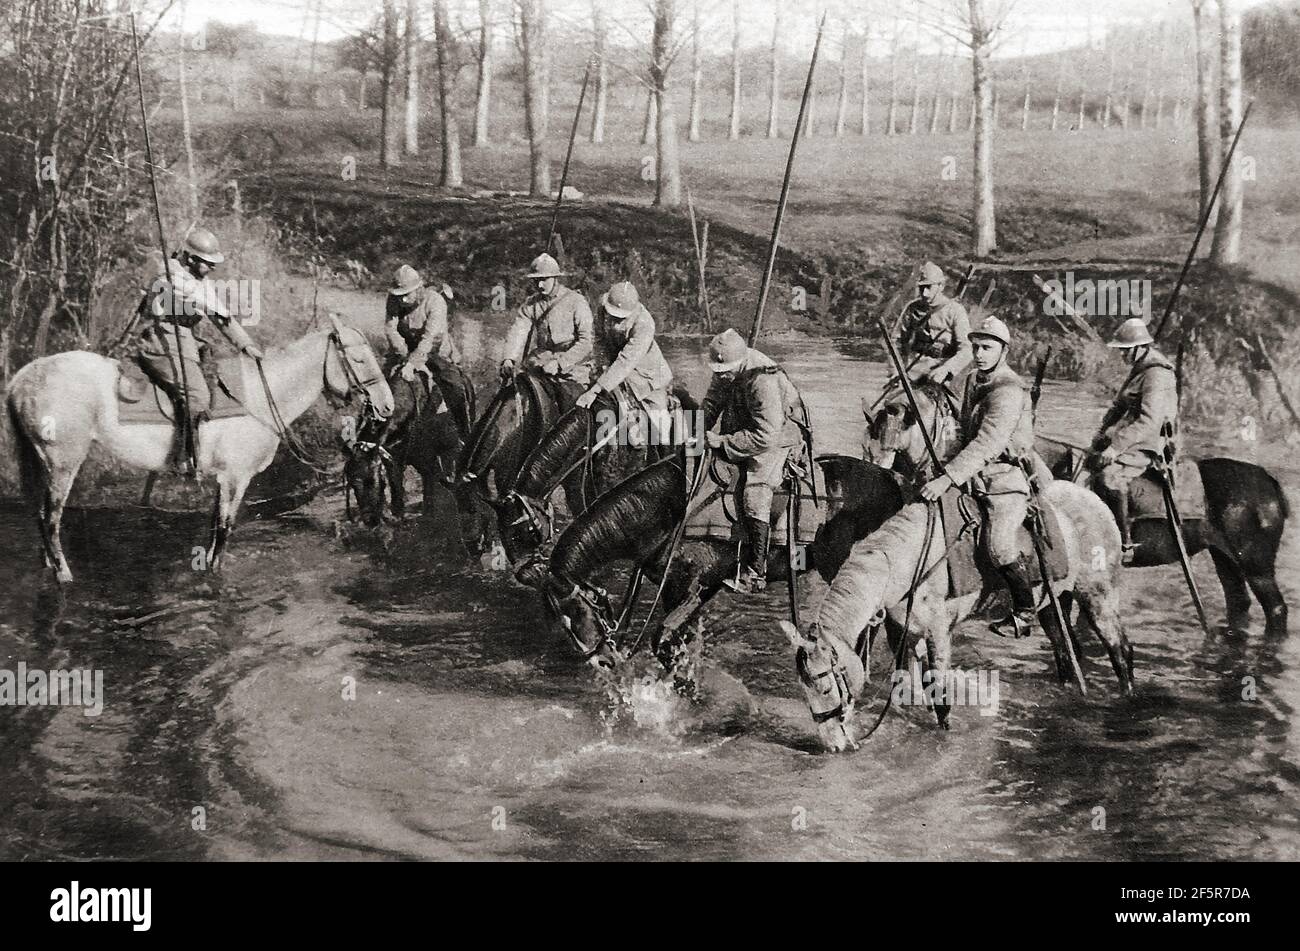 WWI - French Dragoons watering their horses near the front. They were considered one of the finest cavalry units of the time. Dragoons originally were a class of mounted infantry, who   dismounted  from their horses to fight on foot. From the early 17th century  dragoons were  employed as conventional cavalry and trained for combat with swords  or spears and firearms whilst still on horseback. The name dragoon  is derived from a type of firearm, called a dragon, which was a handgun version of a blunderbuss.The modern French Army retains three dragoon regiments of  the original  32 of WWI Stock Photo